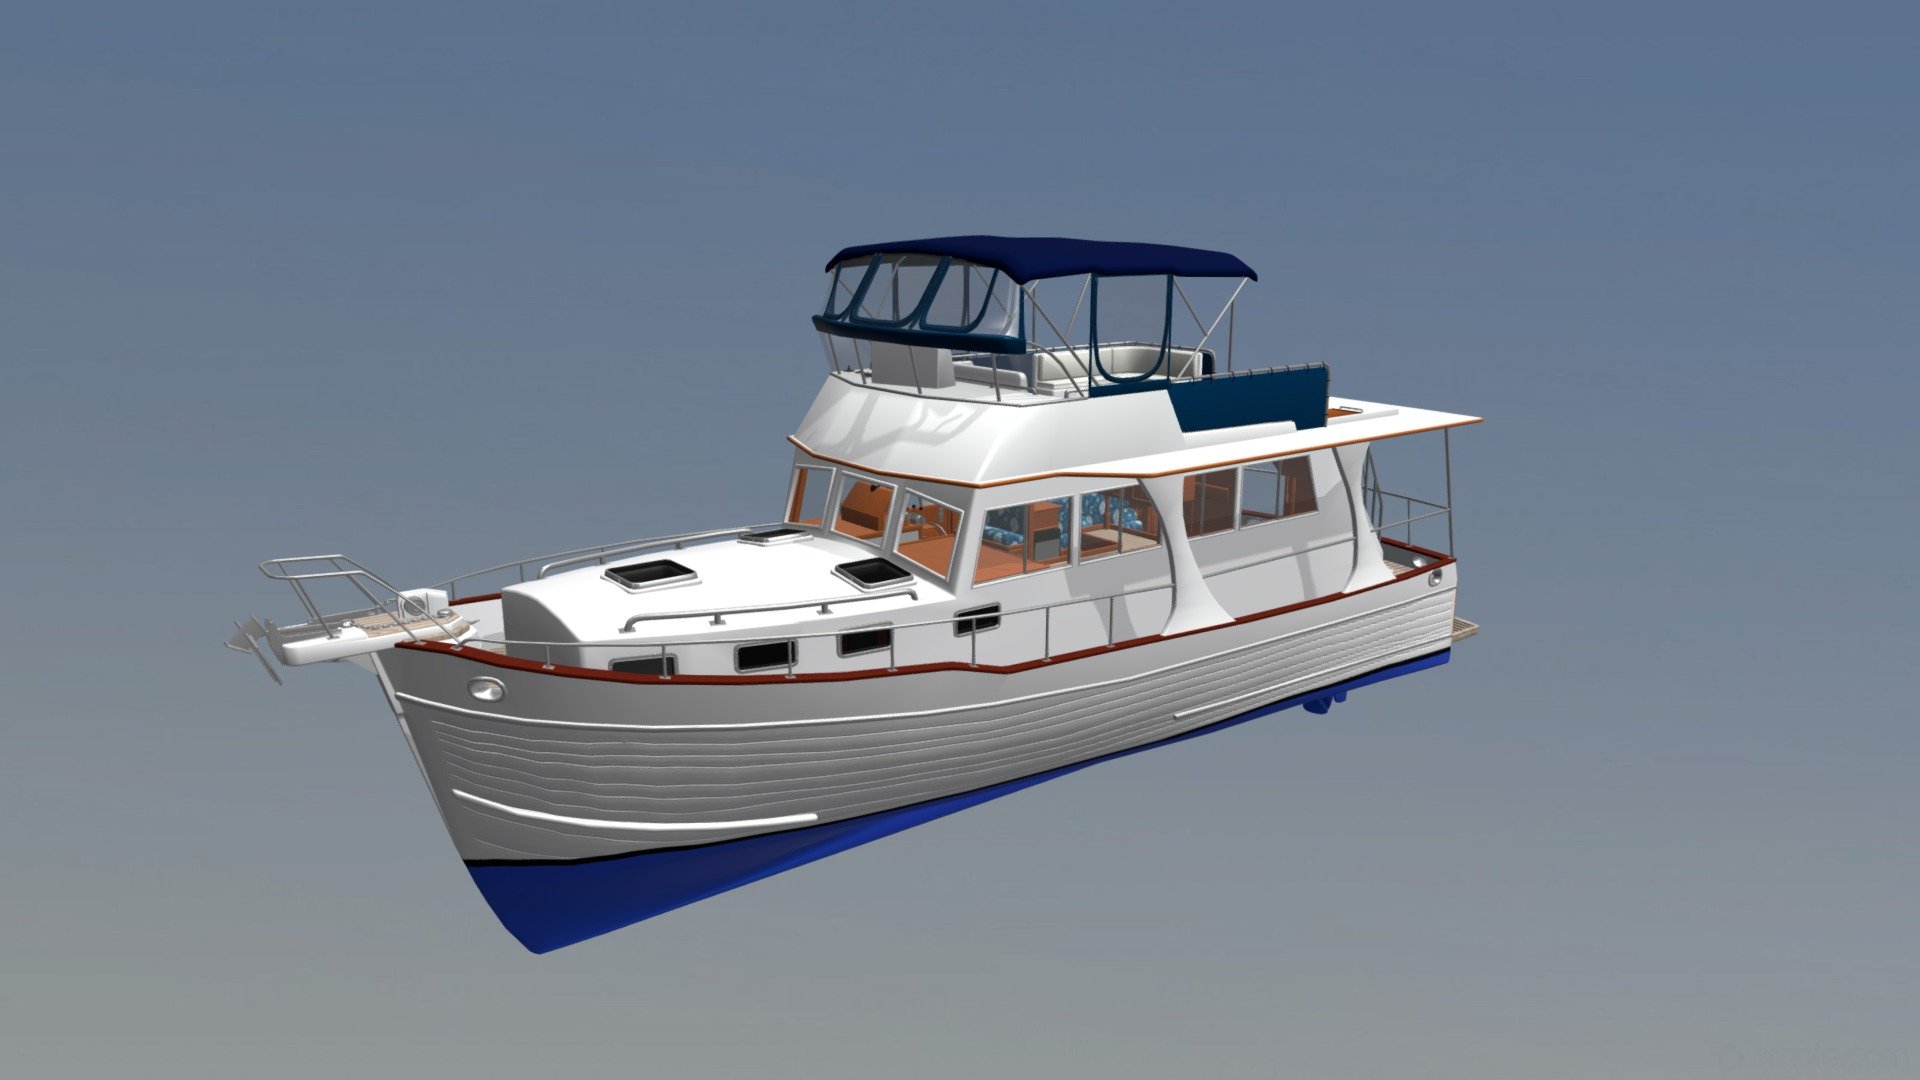 3D print Grand Banks 42 RC boat Fishing boat trawler • made with ET5・Cults